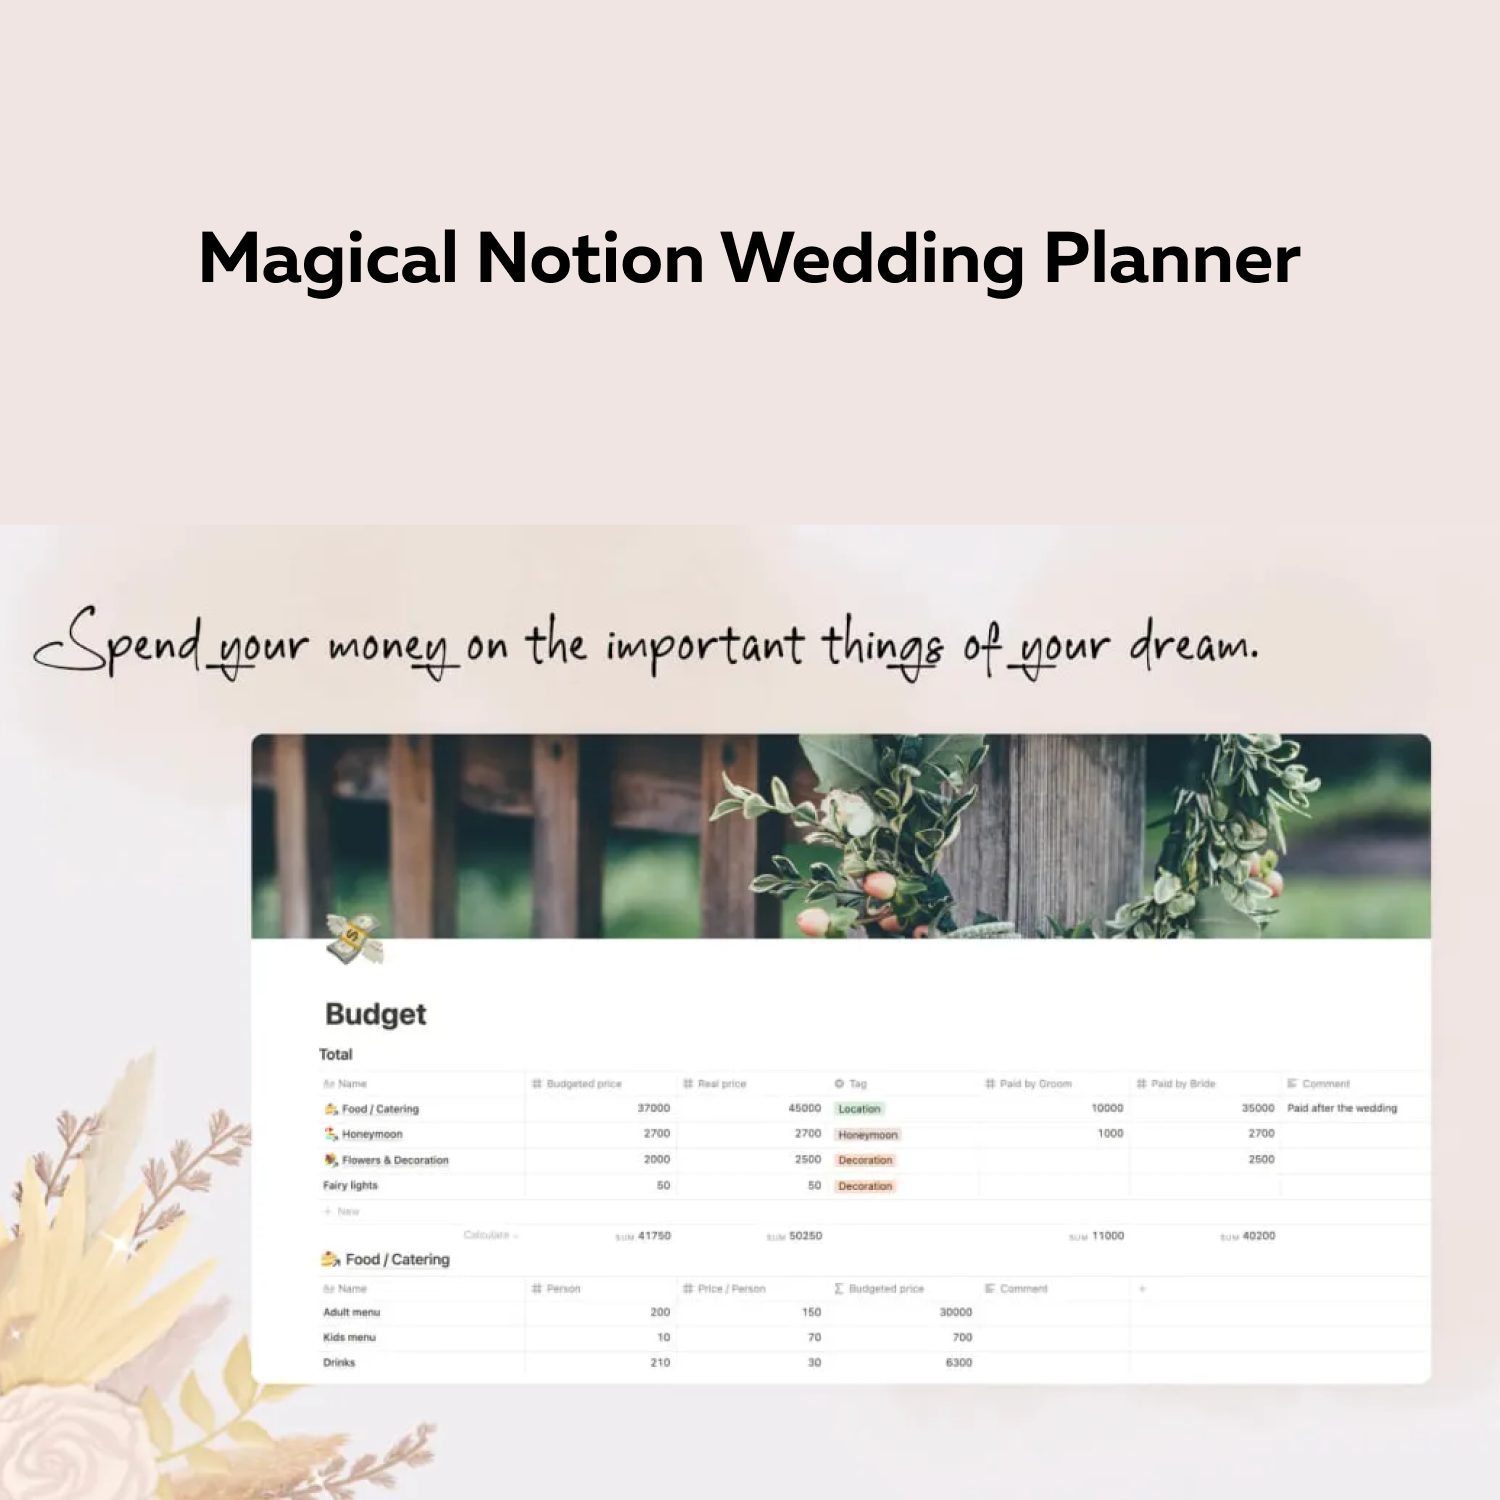 Magical notion wedding planner.